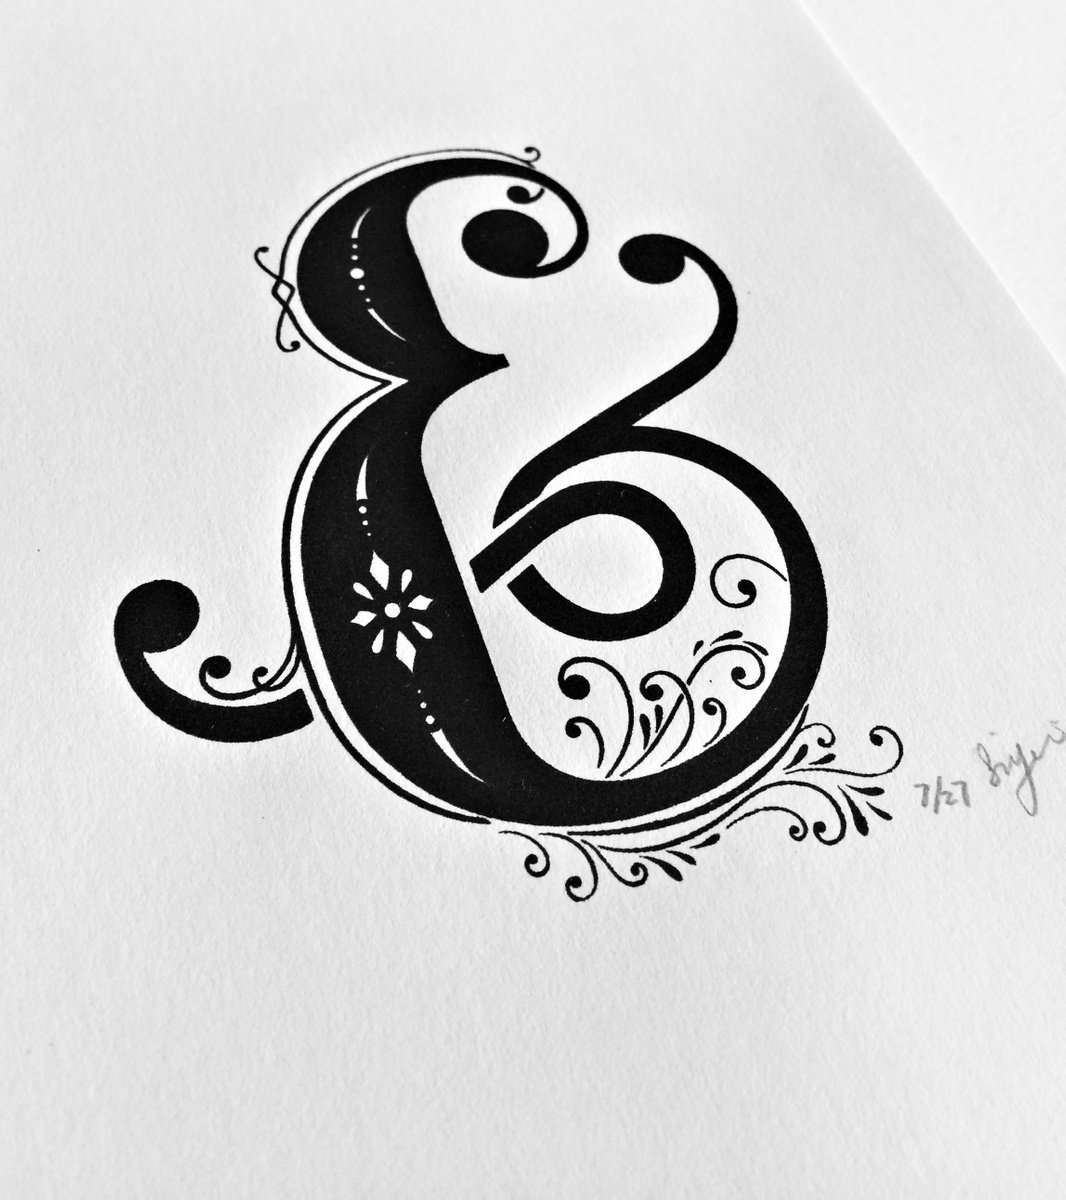 Ampersand Wall Art, A5 Screen Printed Black And White Typography Print